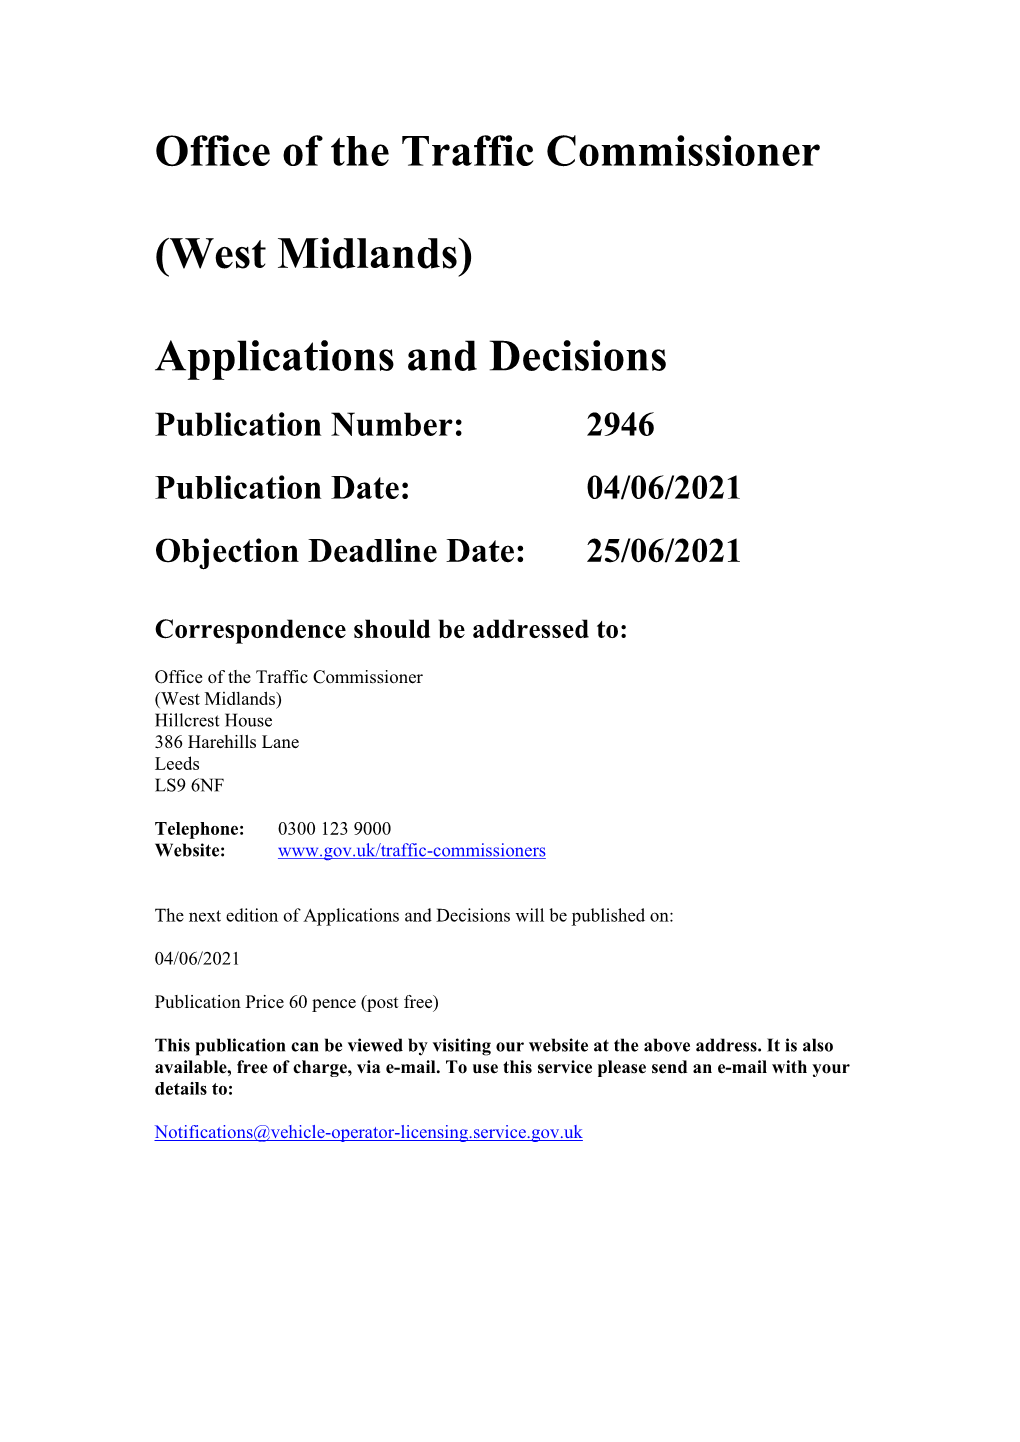 Office of the Traffic Commissioner (West Midlands) Applications And